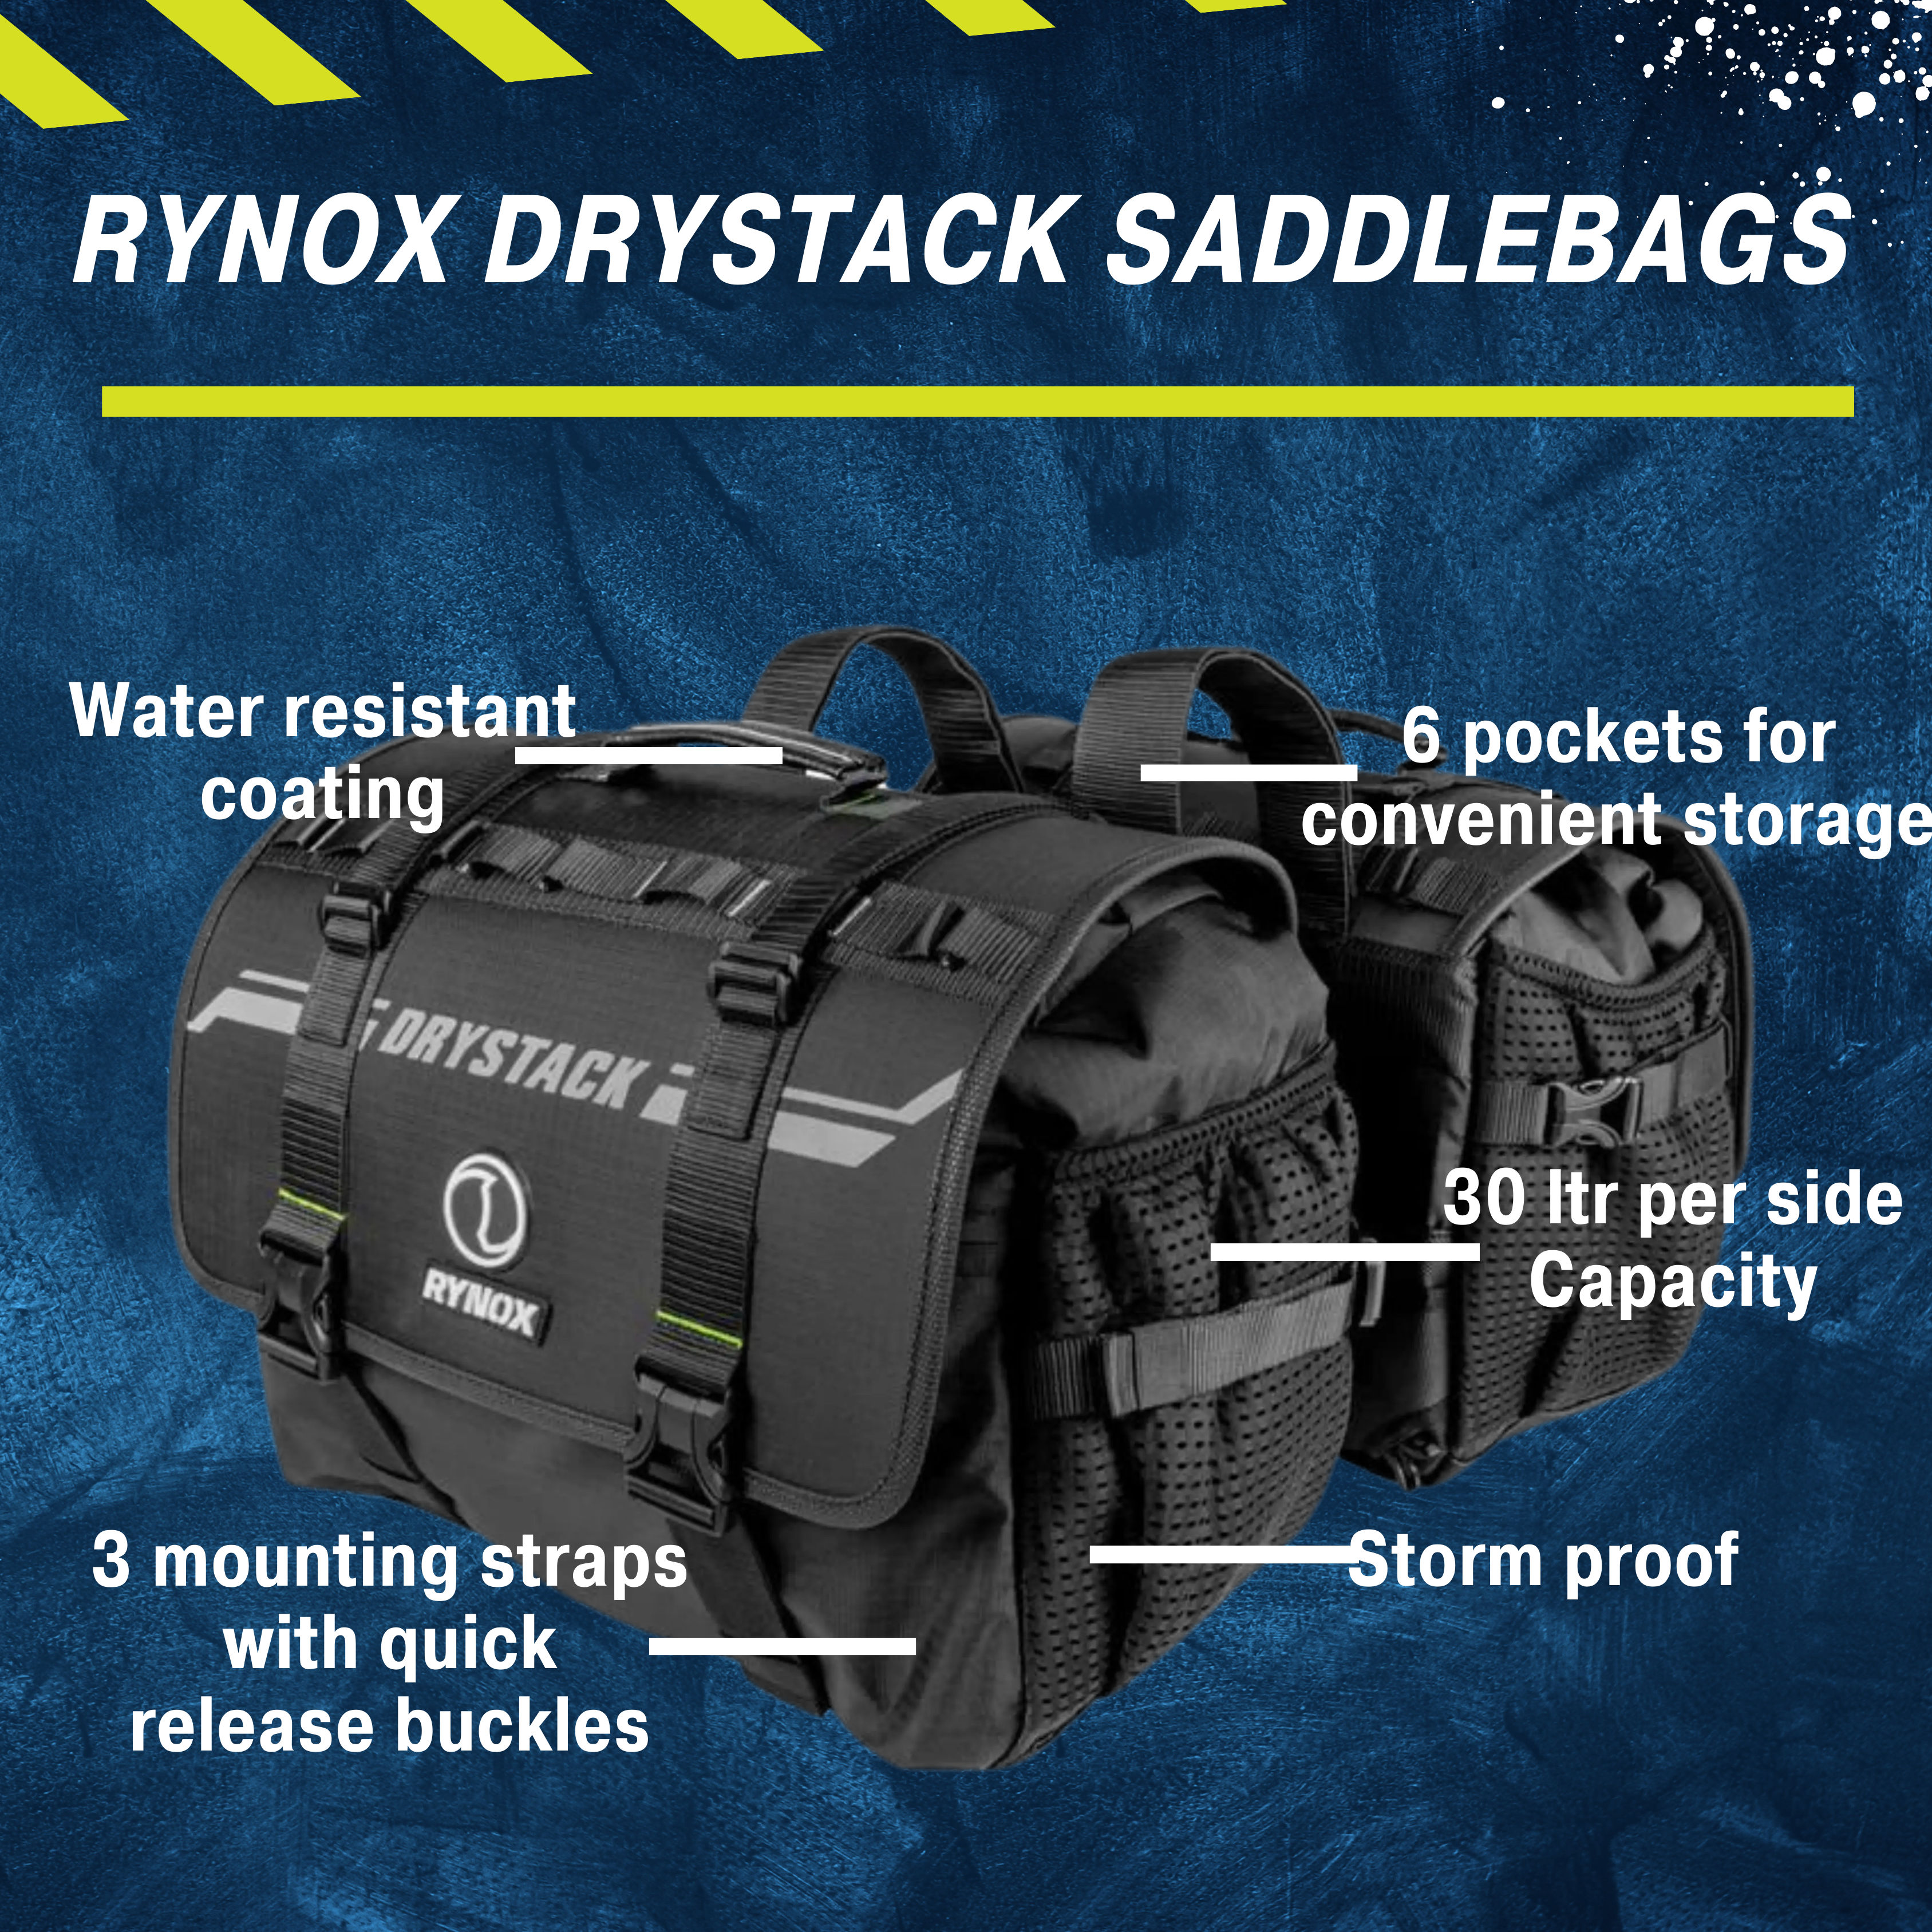 This is an image of Rynox Drystack Saddlebags on rent offered by SharePal.in